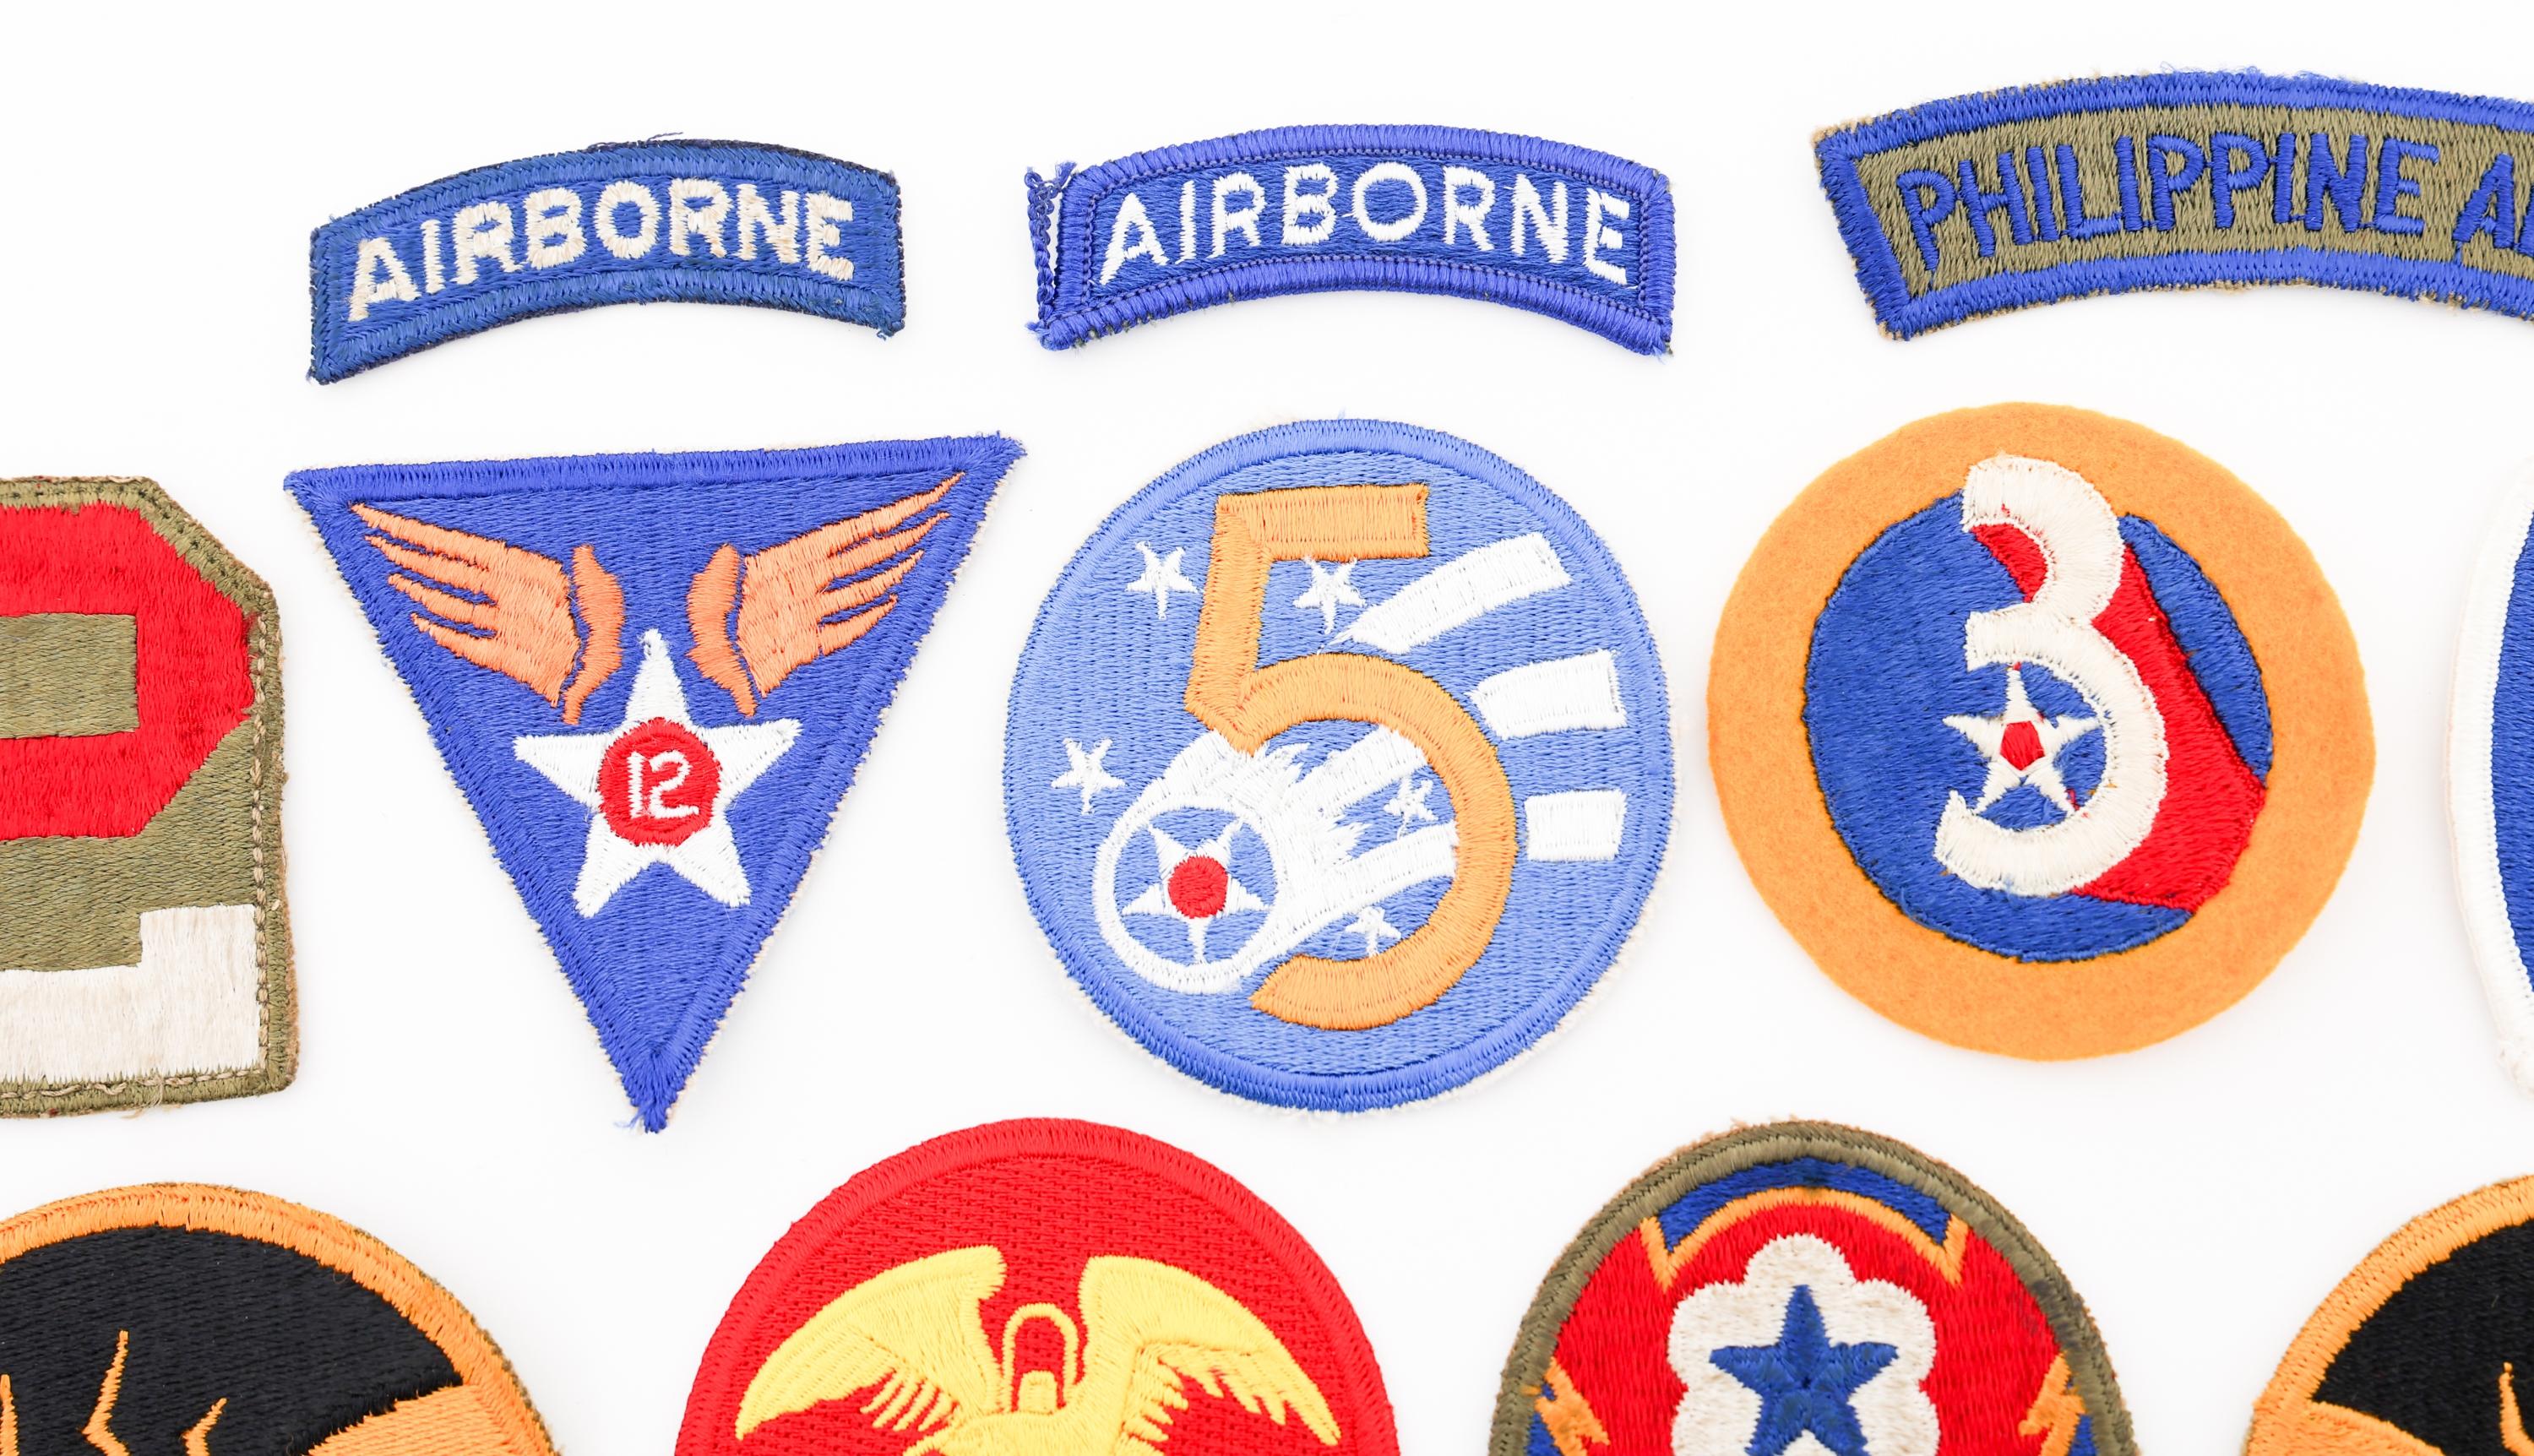 WWII - COLD WAR US ARMY & AIR FORCE PATCHES